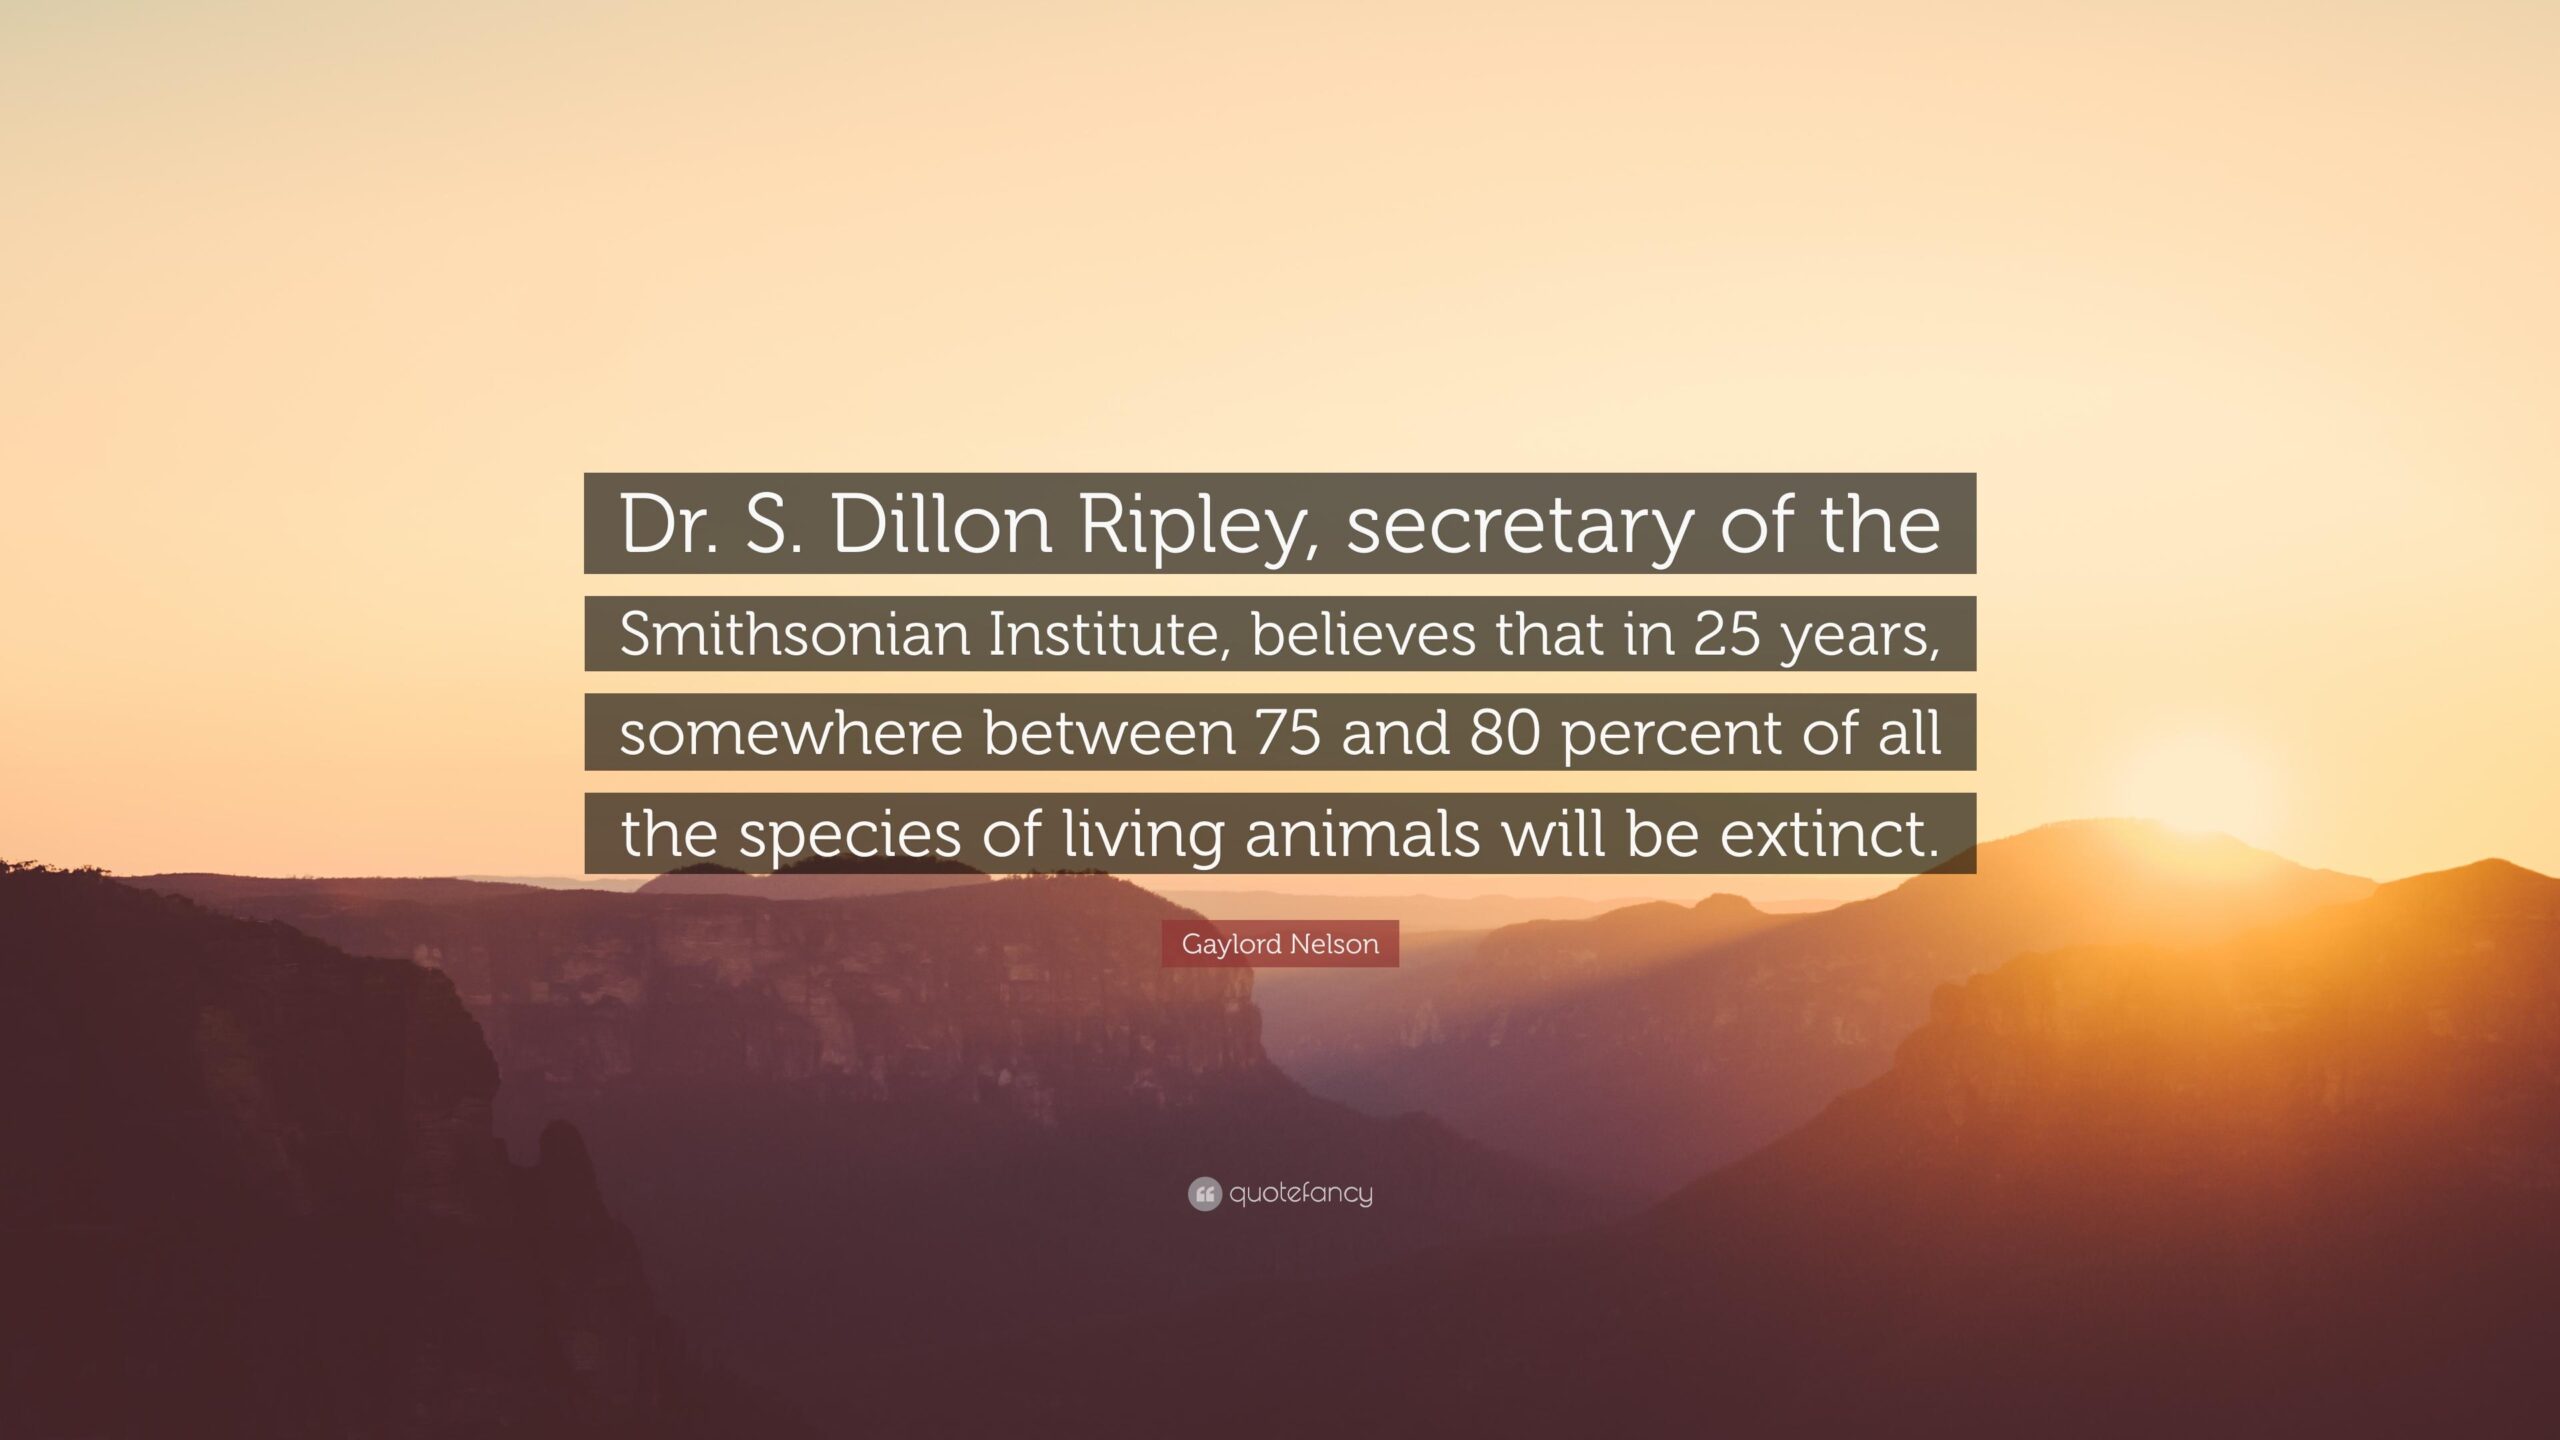 Gaylord Nelson Quote “Dr S Dillon Ripley, secretary of the